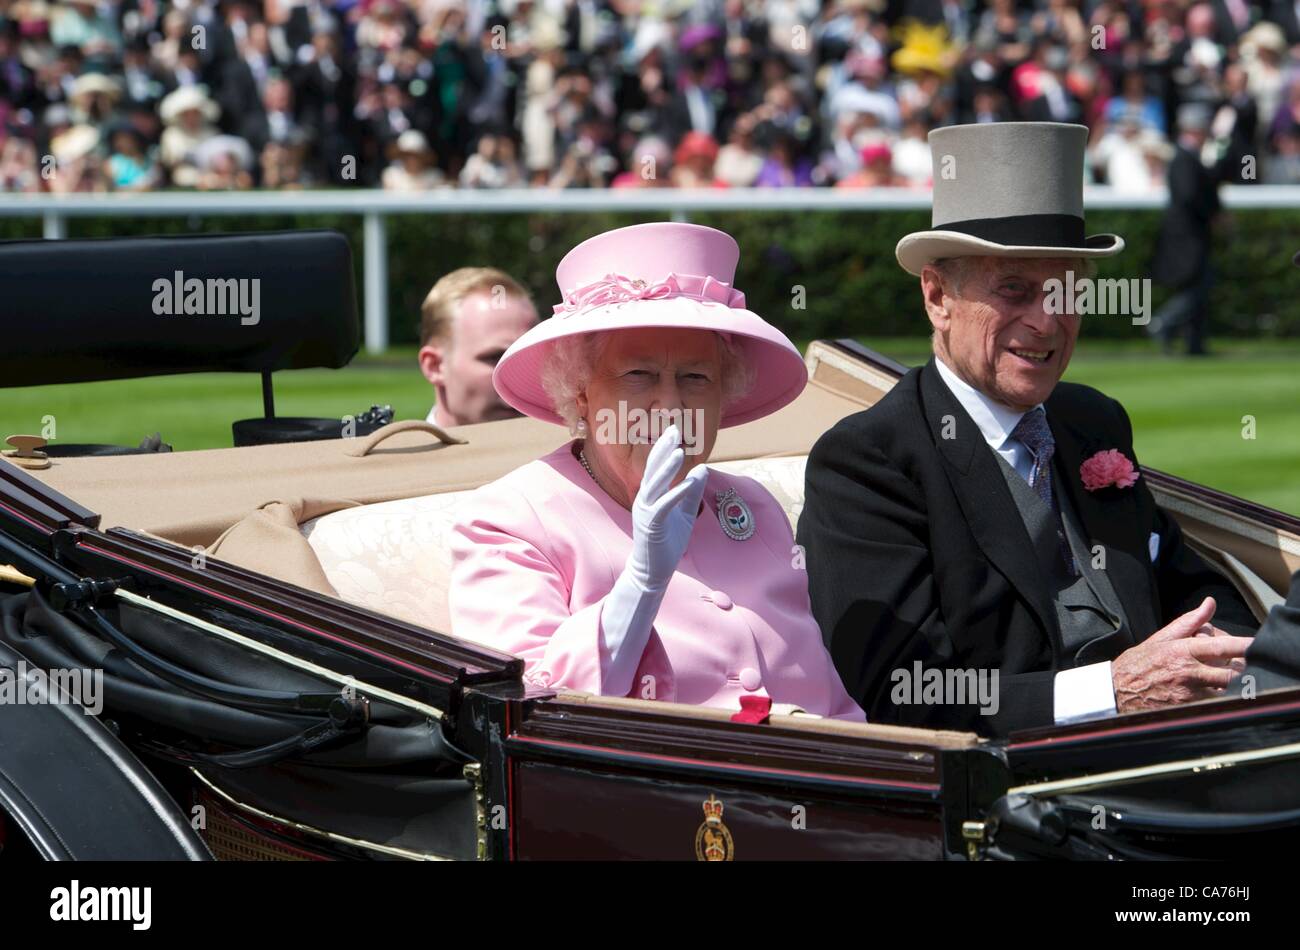 June 20, 2012. Ascot, UK. Queen Elizabeth ll and Prince Philip, Duke of Edinburgh arrive in an open carriage on second Day at Royal Ascot. Stock Photo